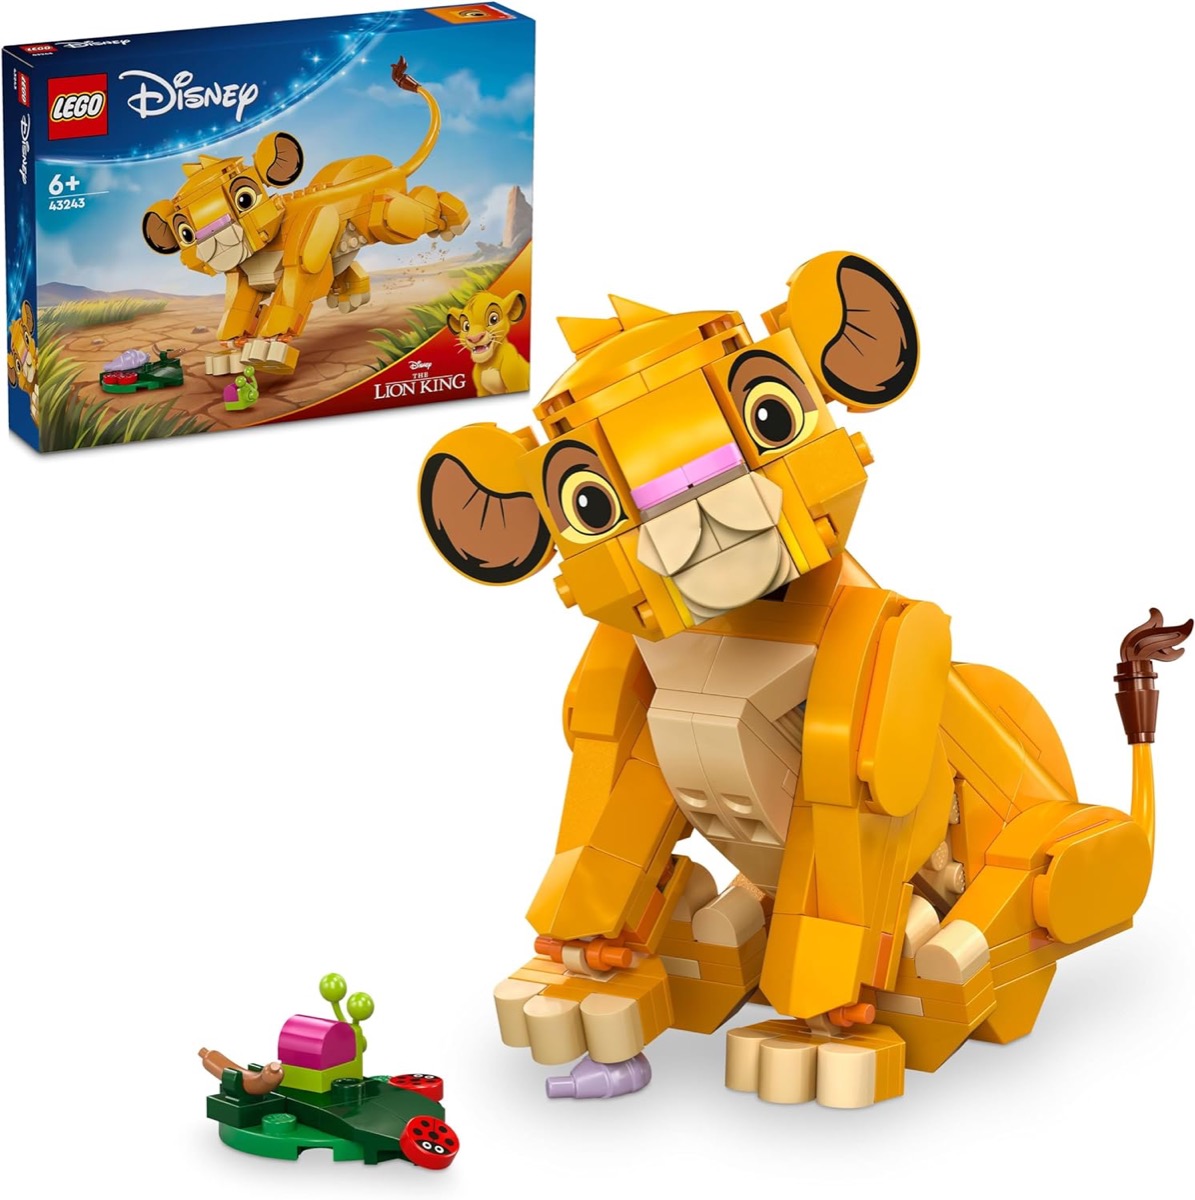 A LEGO model of Simba from "The Lion King" 